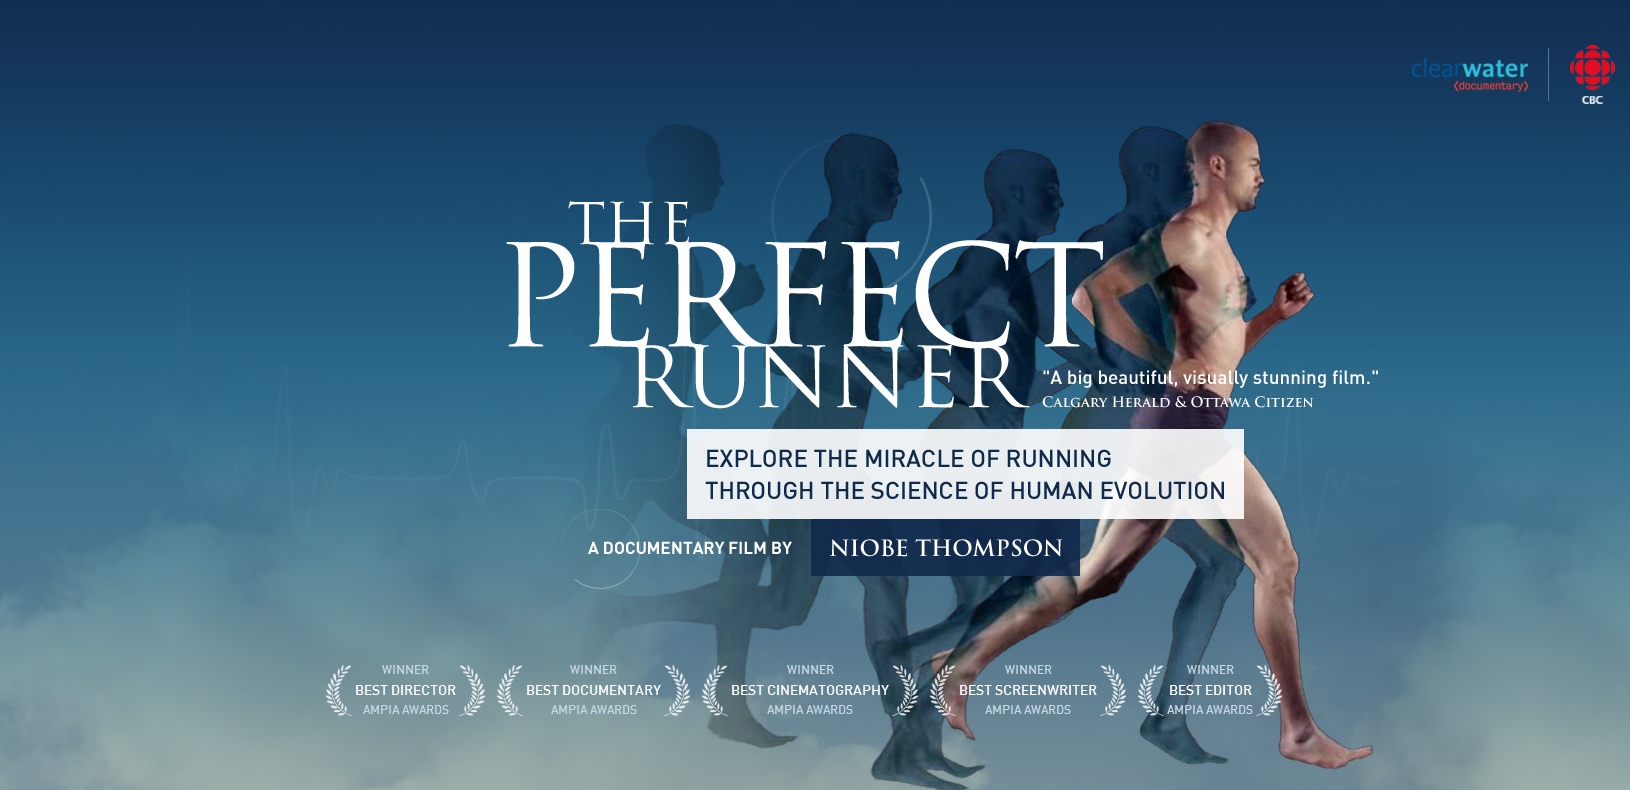 The Perfect Runner (2012)